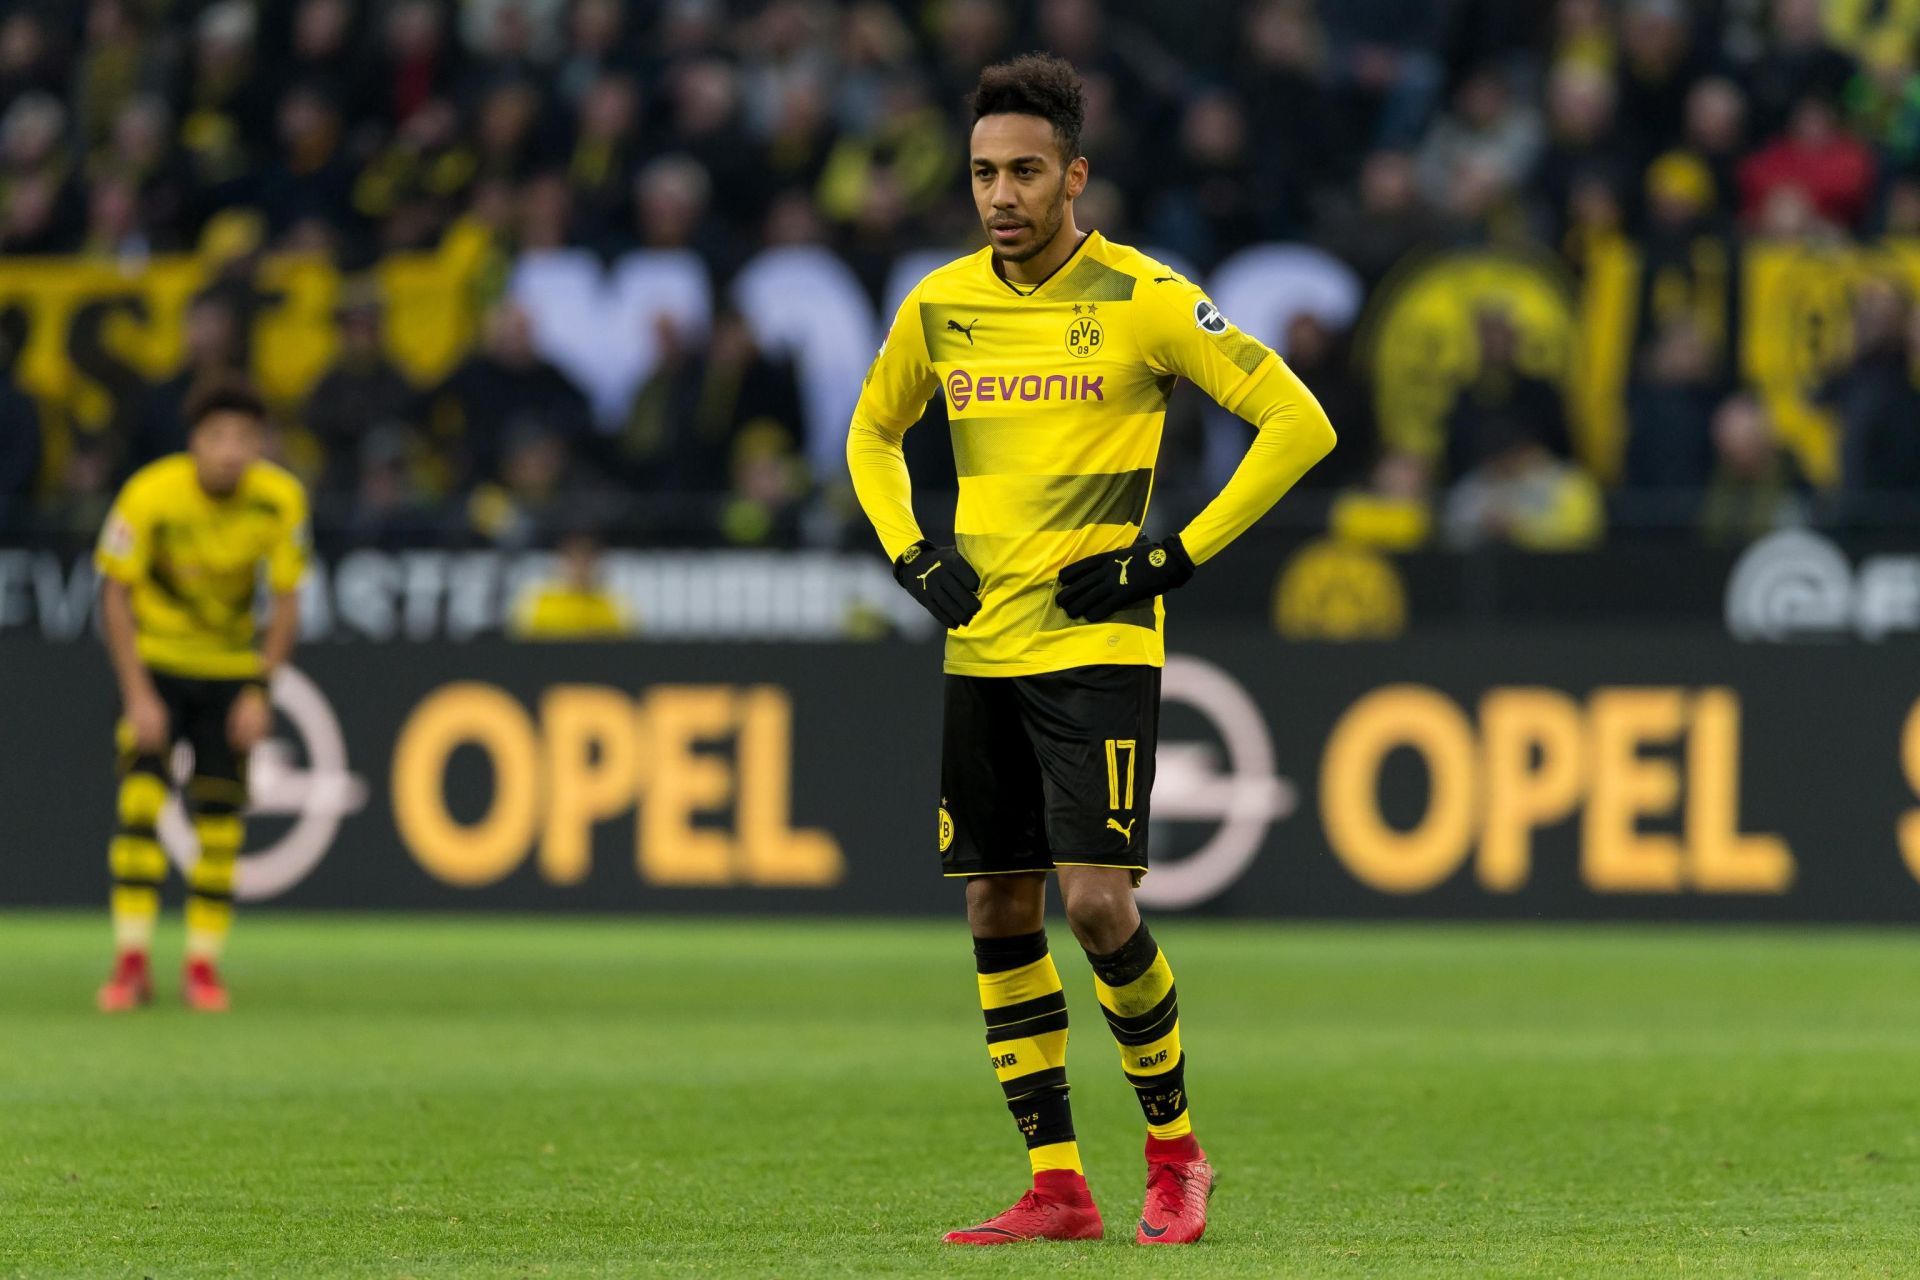 Aubameyang at Dortmund was a force to be reckoned with